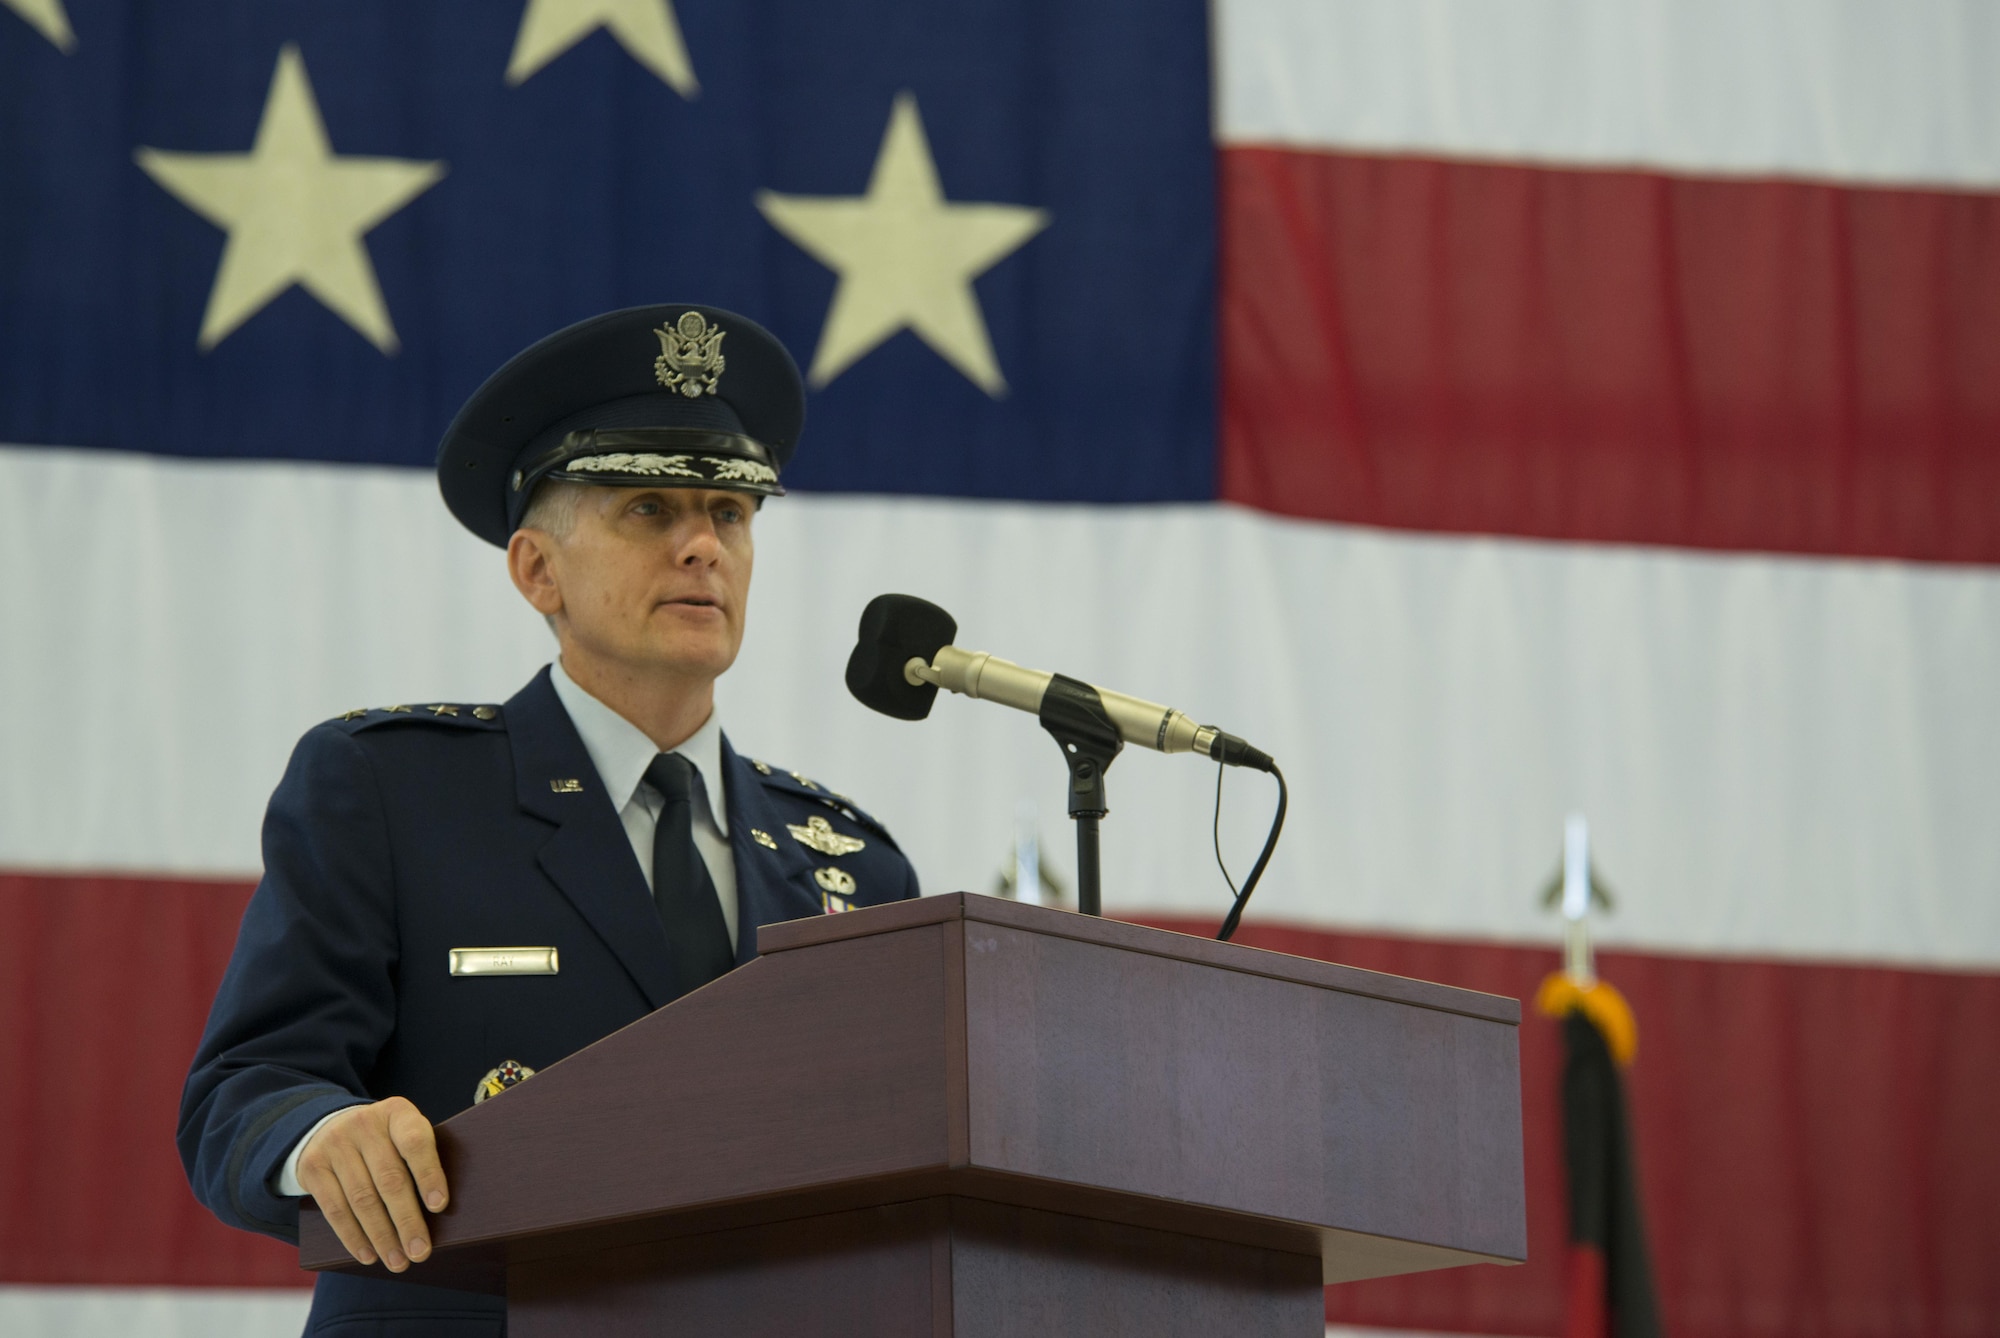 Lt. Gen. Timothy M. Ray, outgoing 3rd Air Force commander, gives a speech during a change of command ceremony at Ramstein Air Base, Germany, Oct. 21, 2016. Ray relinquished command of the 3rd Air Force to Lt. Gen. Richard M. Clark. (U.S. Air Force photo by Senior Airman Tryphena Mayhugh)